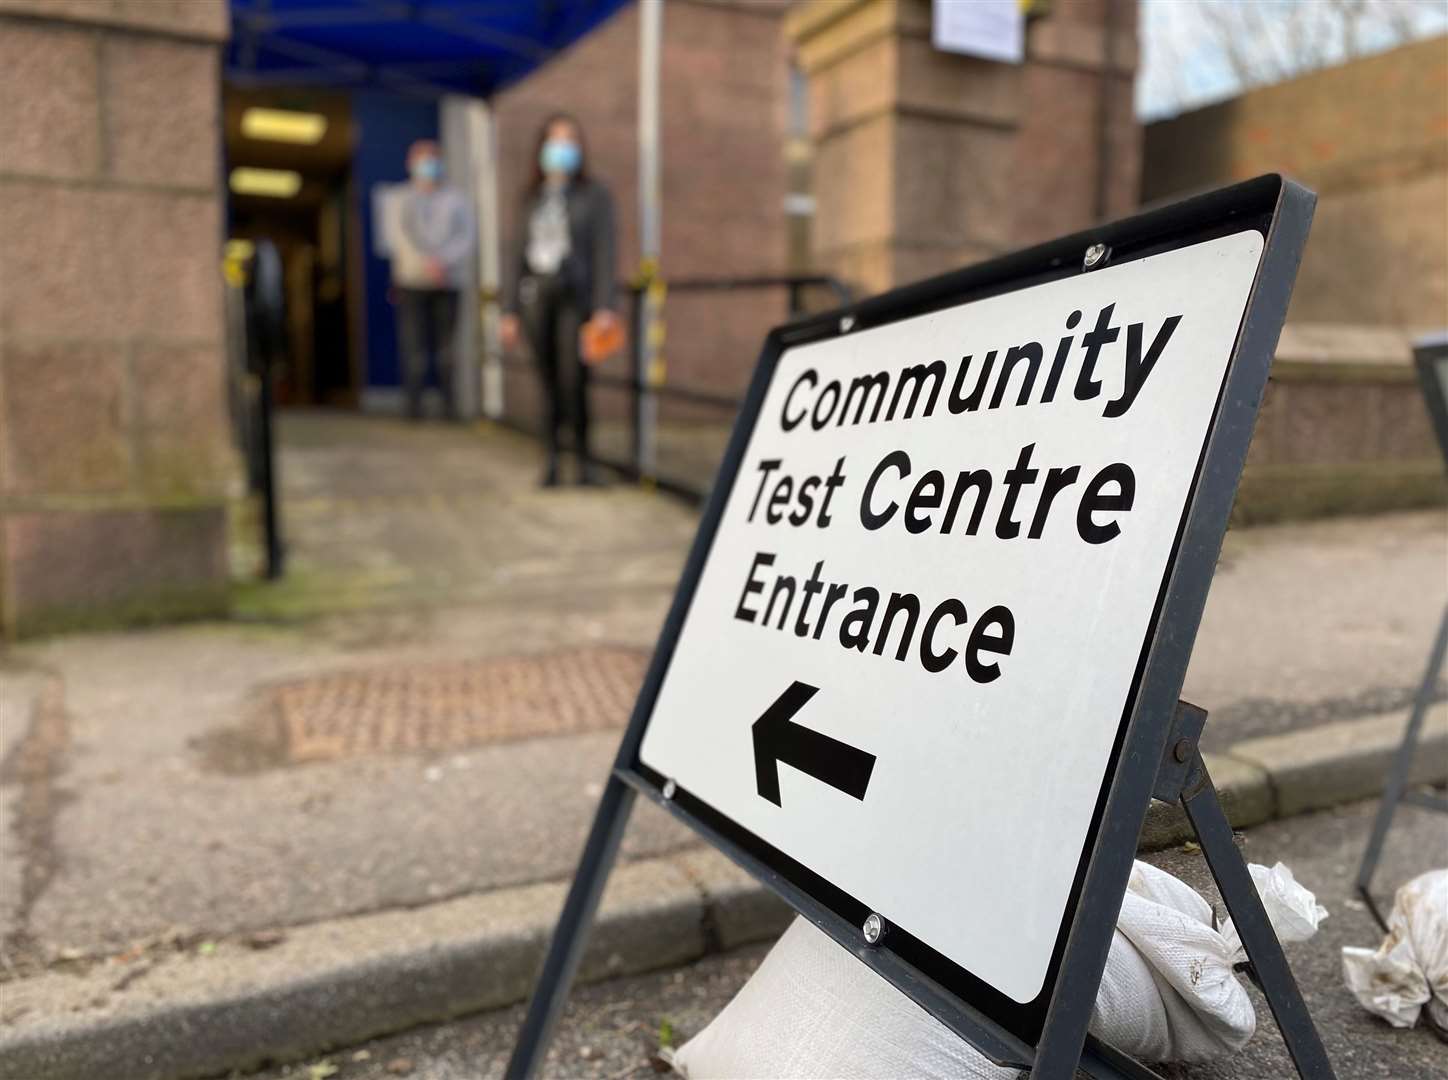 The testing kits are being offered through the Peterhead Community Testing Centre in the Rescue Hall on Prince Street.